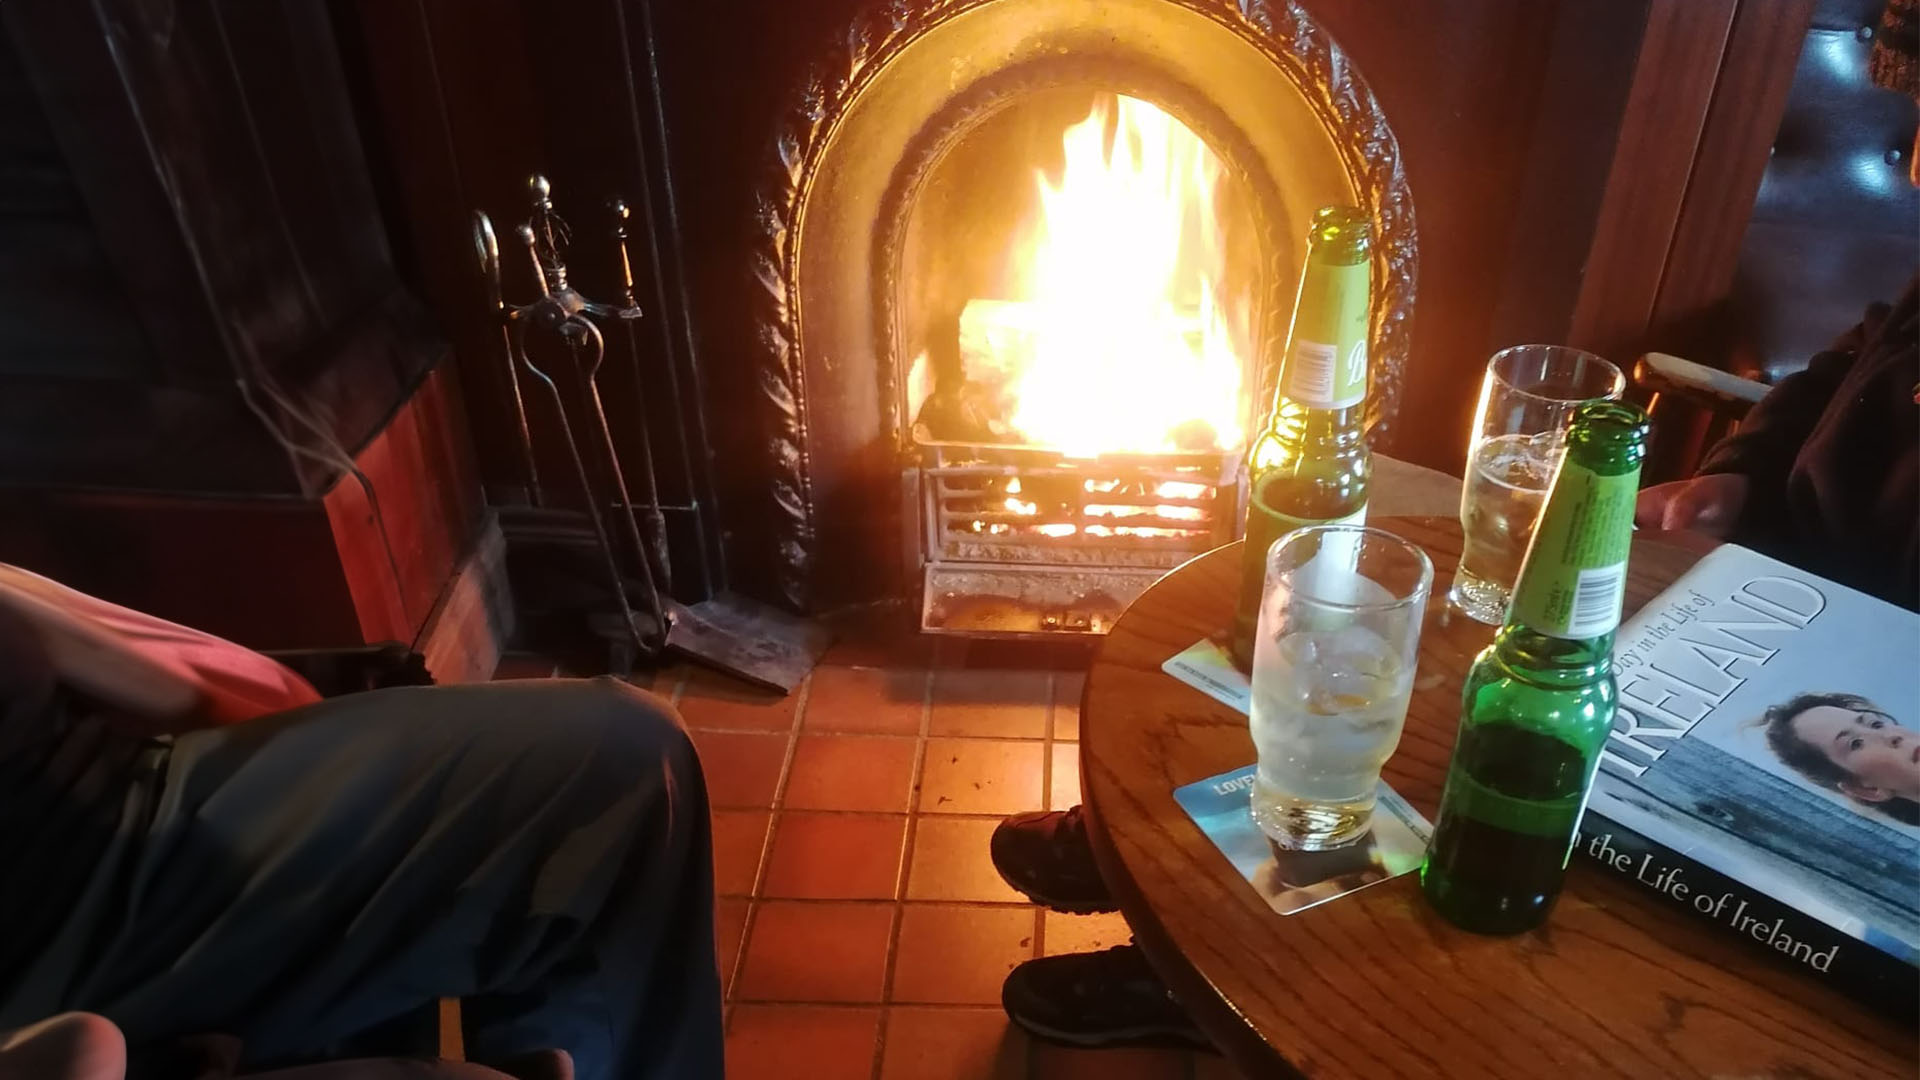 drinking and enjoying fireplace at the shepherds rest after hike